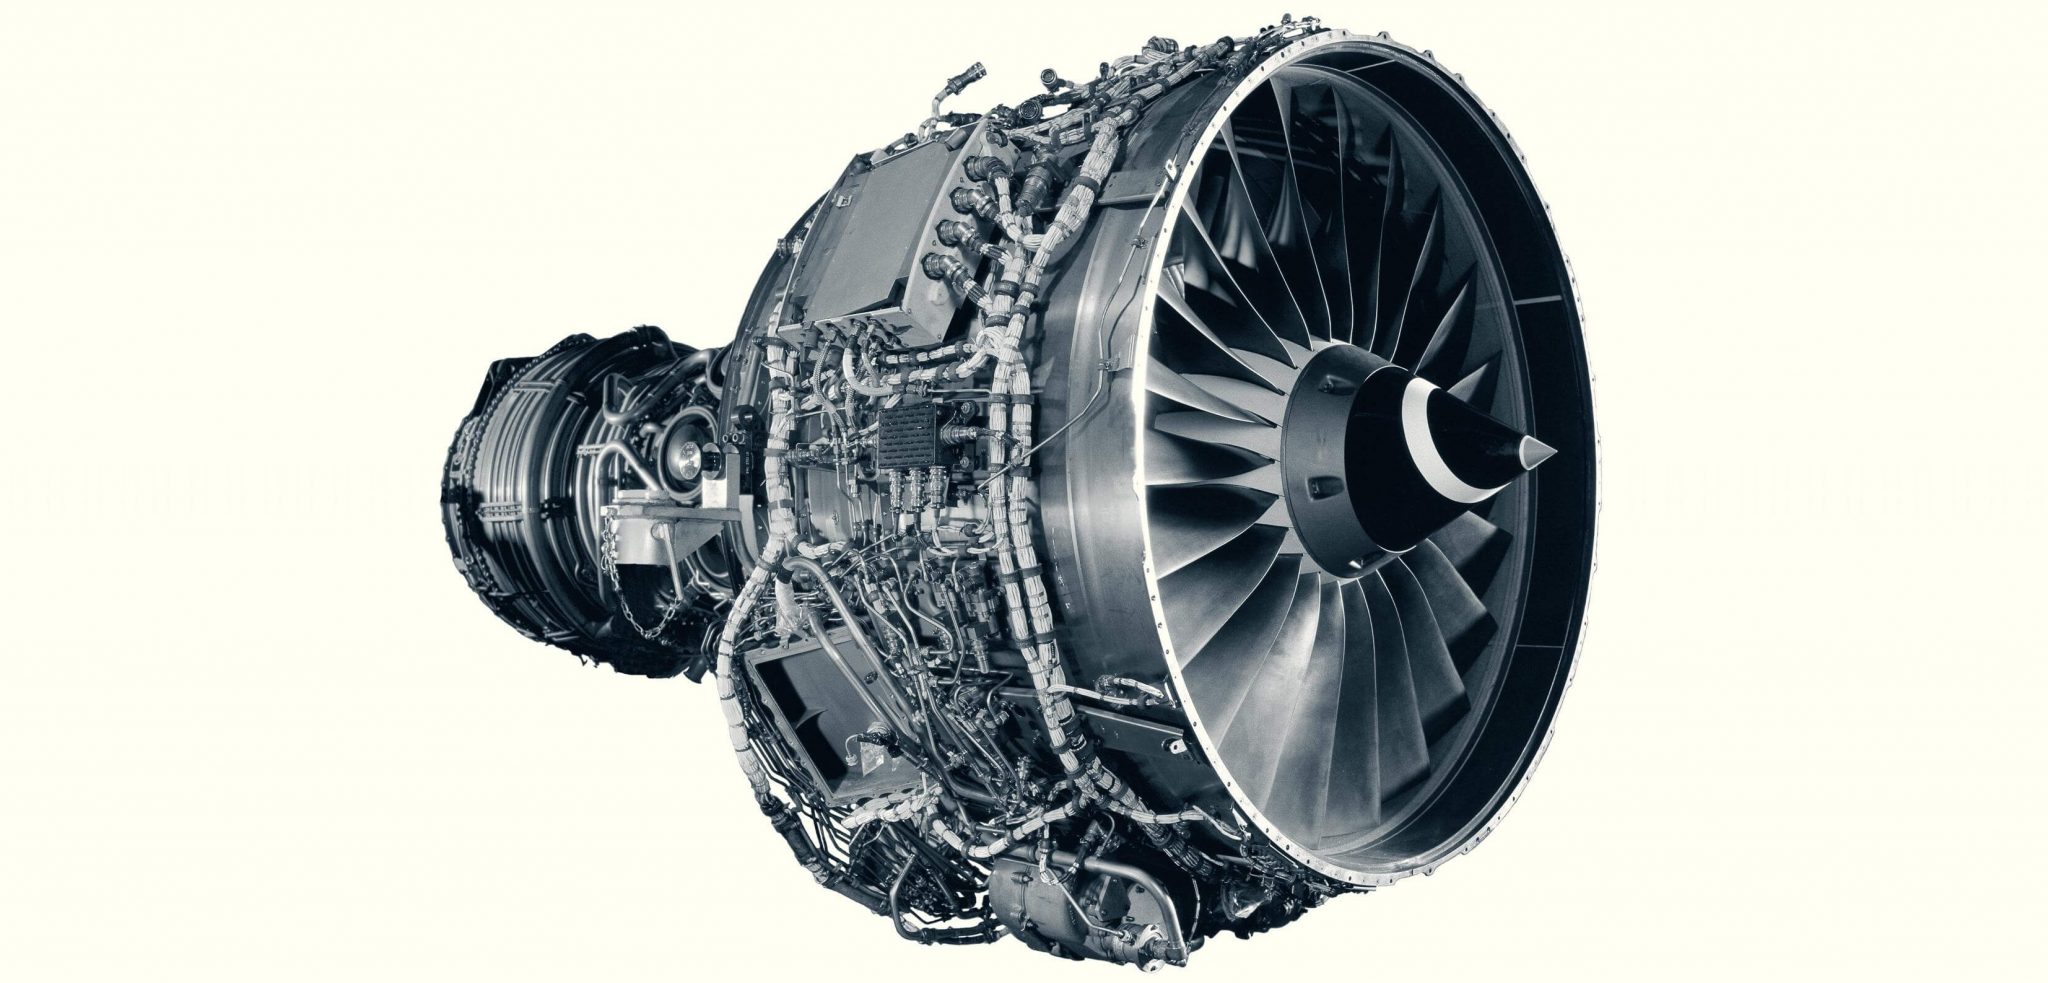 TEAM enters ABS sector with $305m engine deal